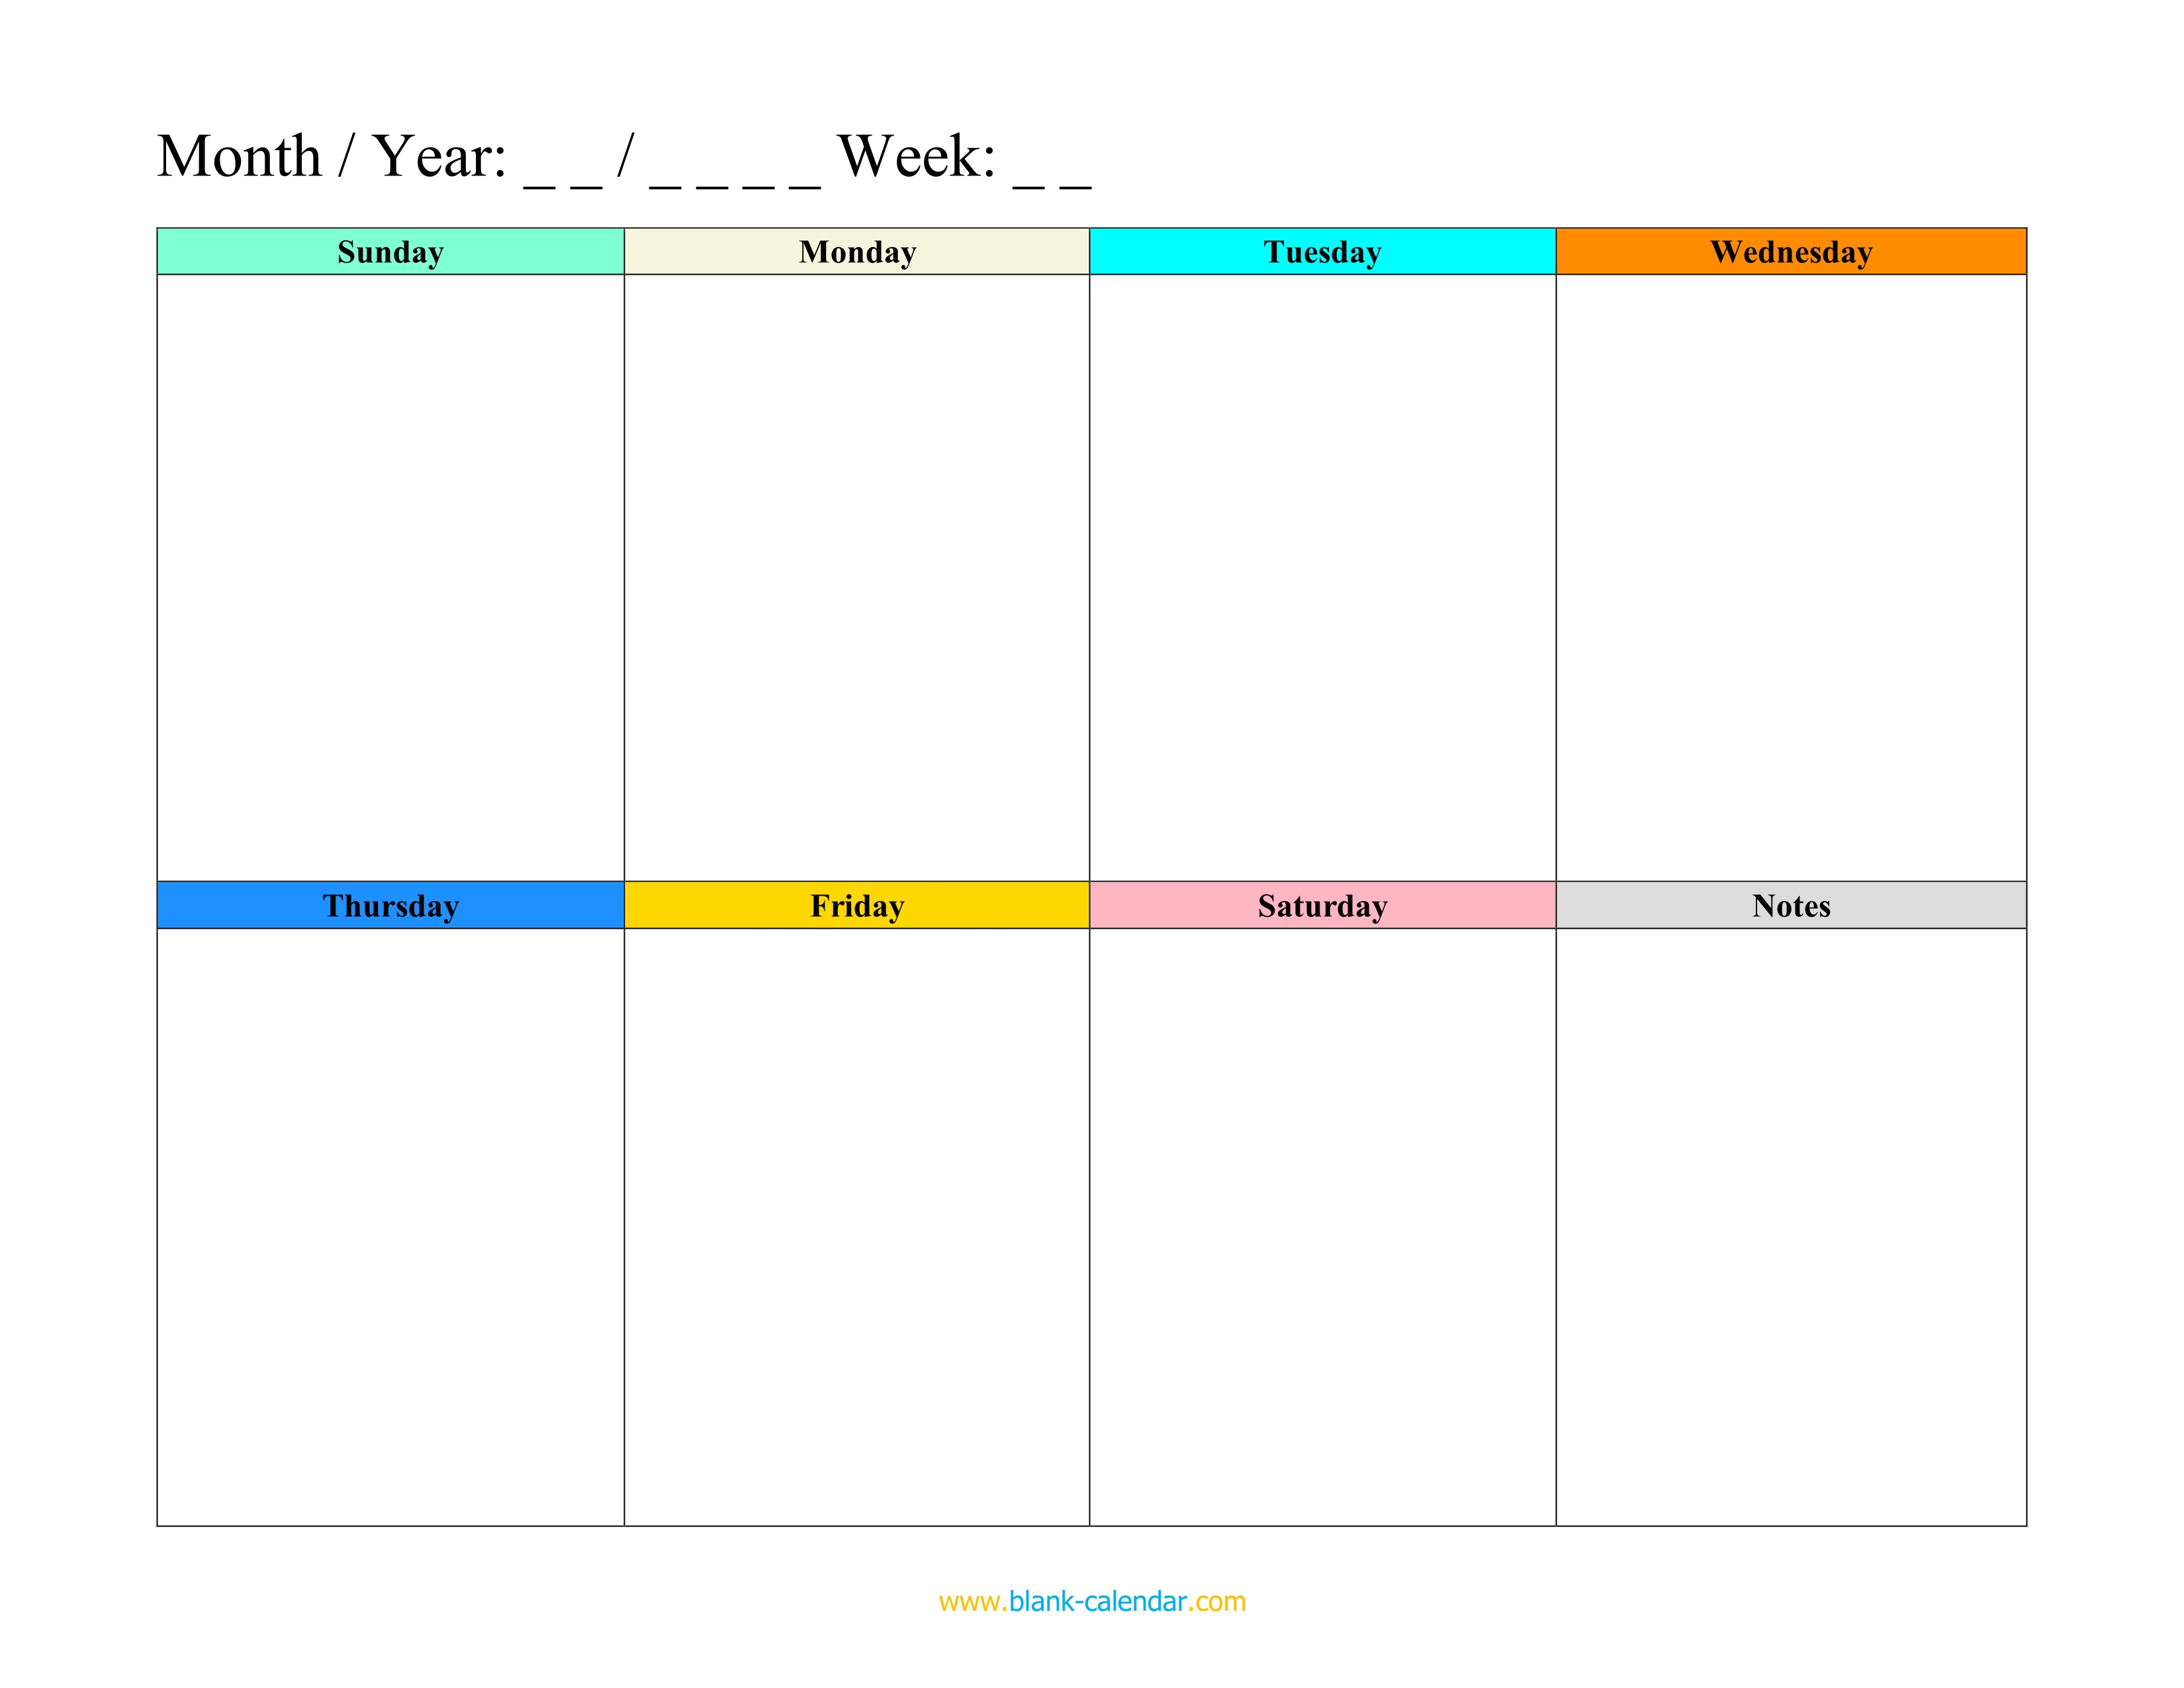 daily schedule editable pdf